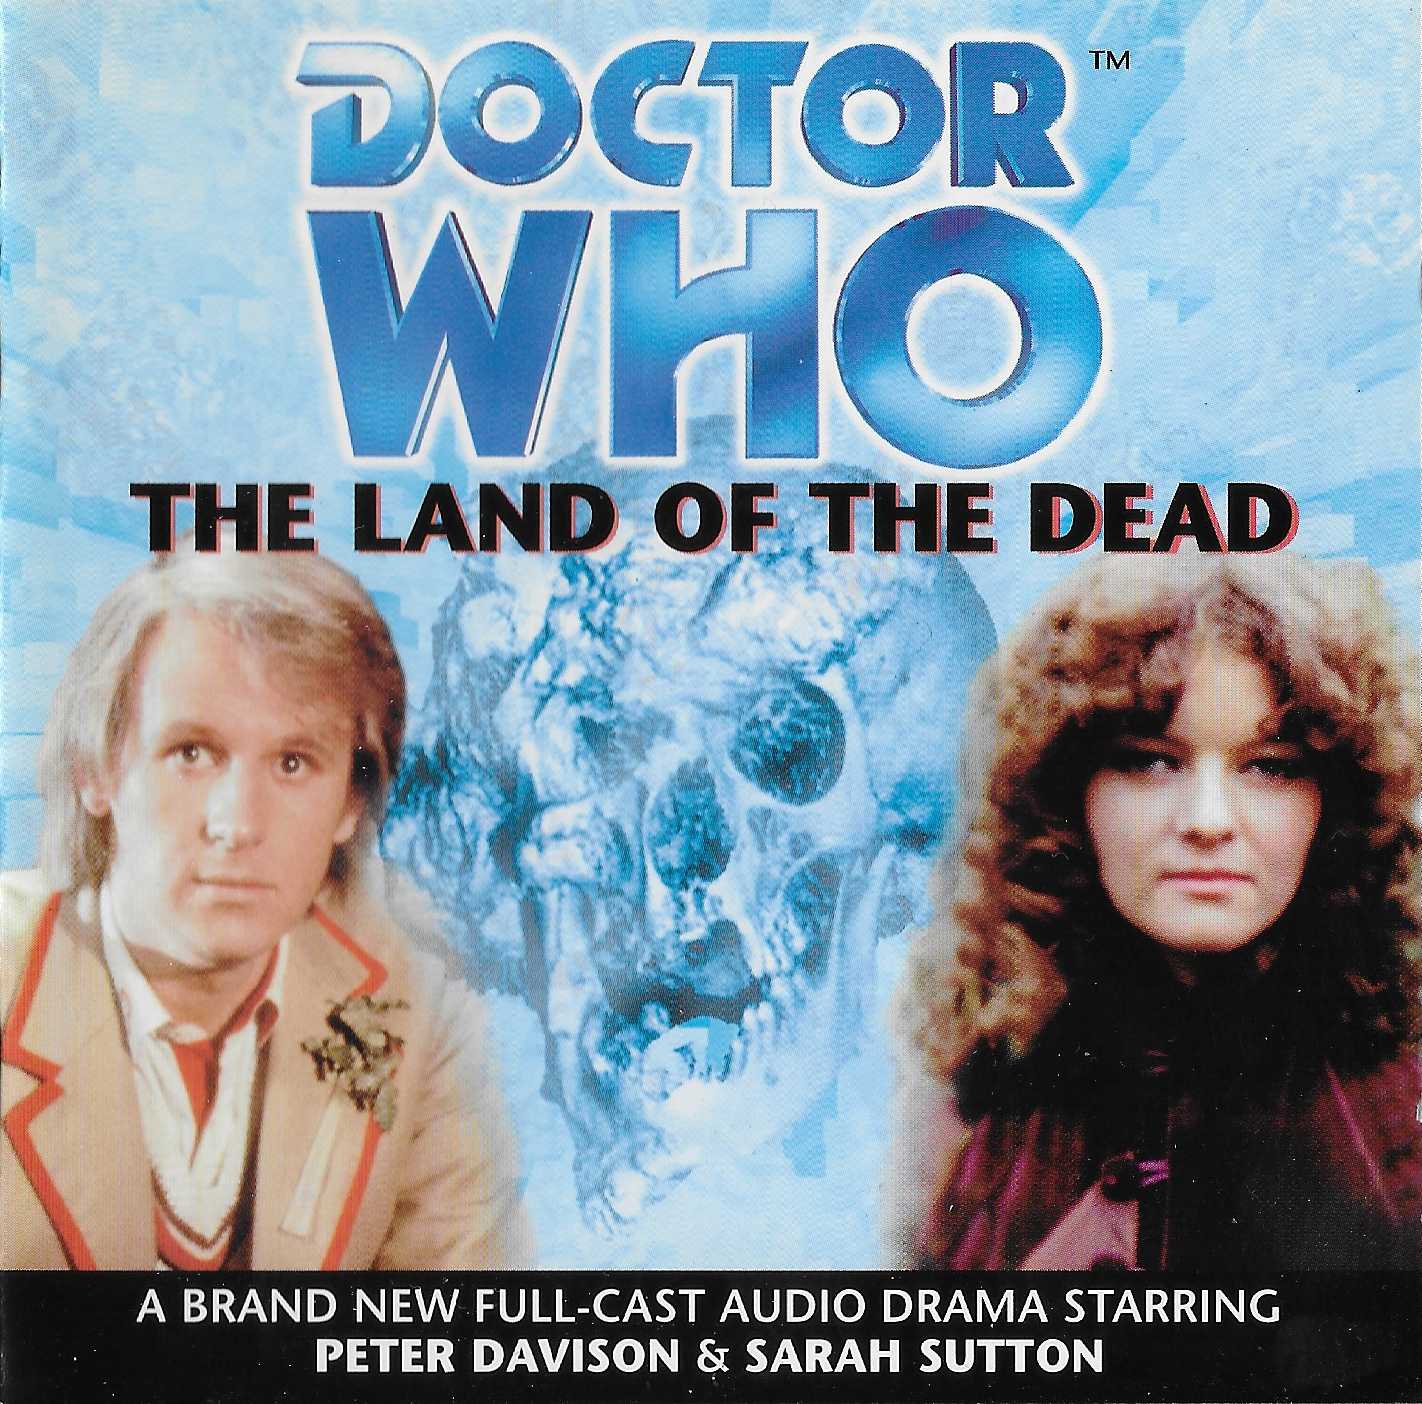 Picture of BFPDWCD 6CA Doctor Who - The land of the dead by artist Stephen Cole from the BBC records and Tapes library